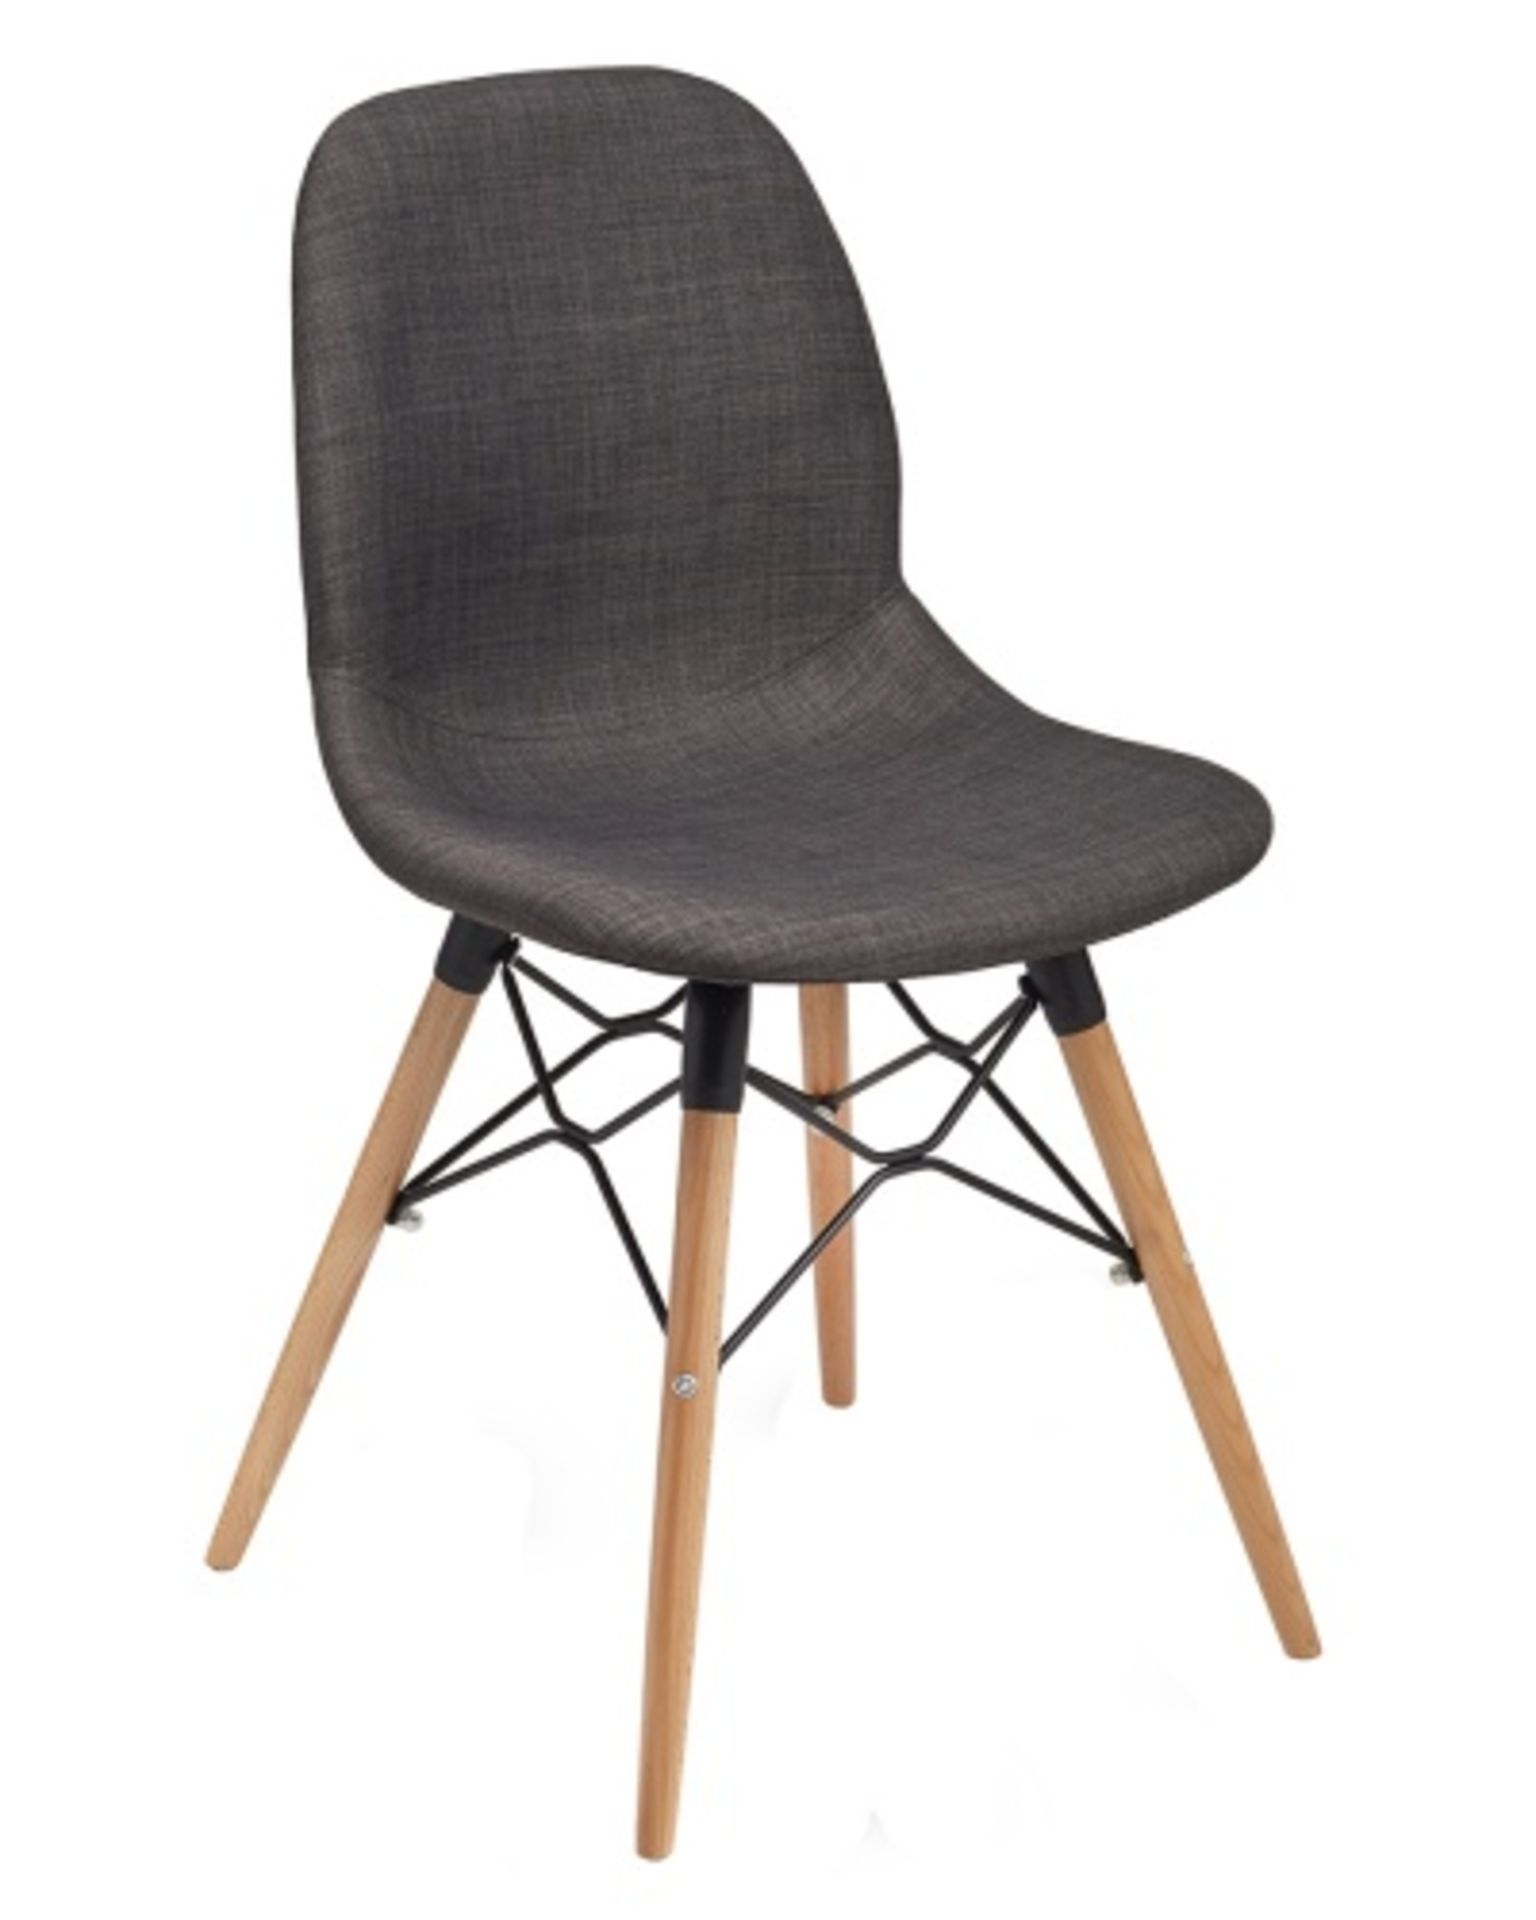 6 x Eames Inspired Eiffel Dining Chairs - Charcoal Fabric Seats With Chrome Bases - New and Unused - - Image 2 of 6